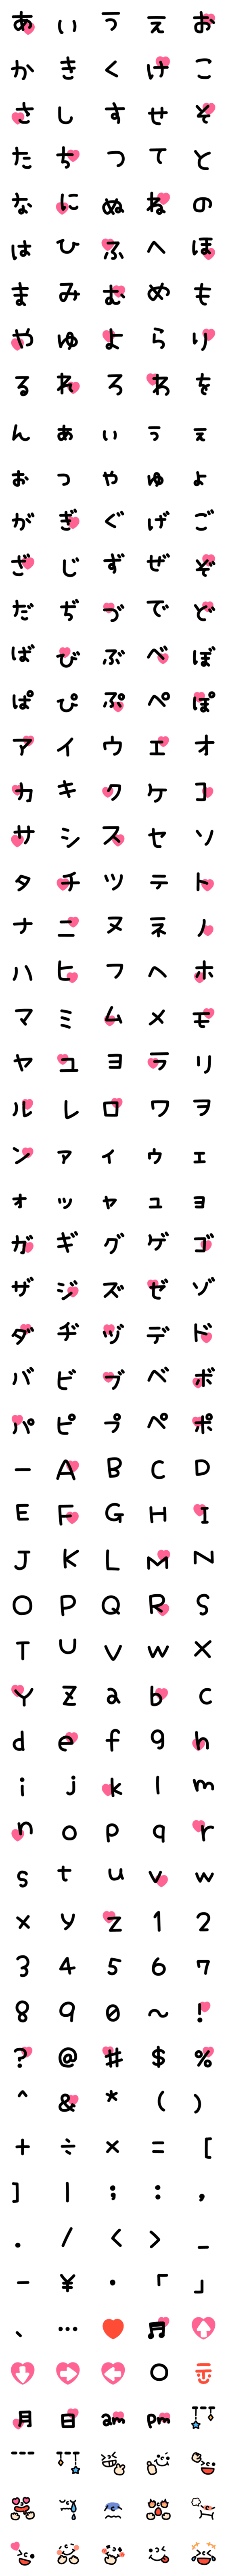 [LINE絵文字]ゆるデコ文字＆顔絵文字の画像一覧